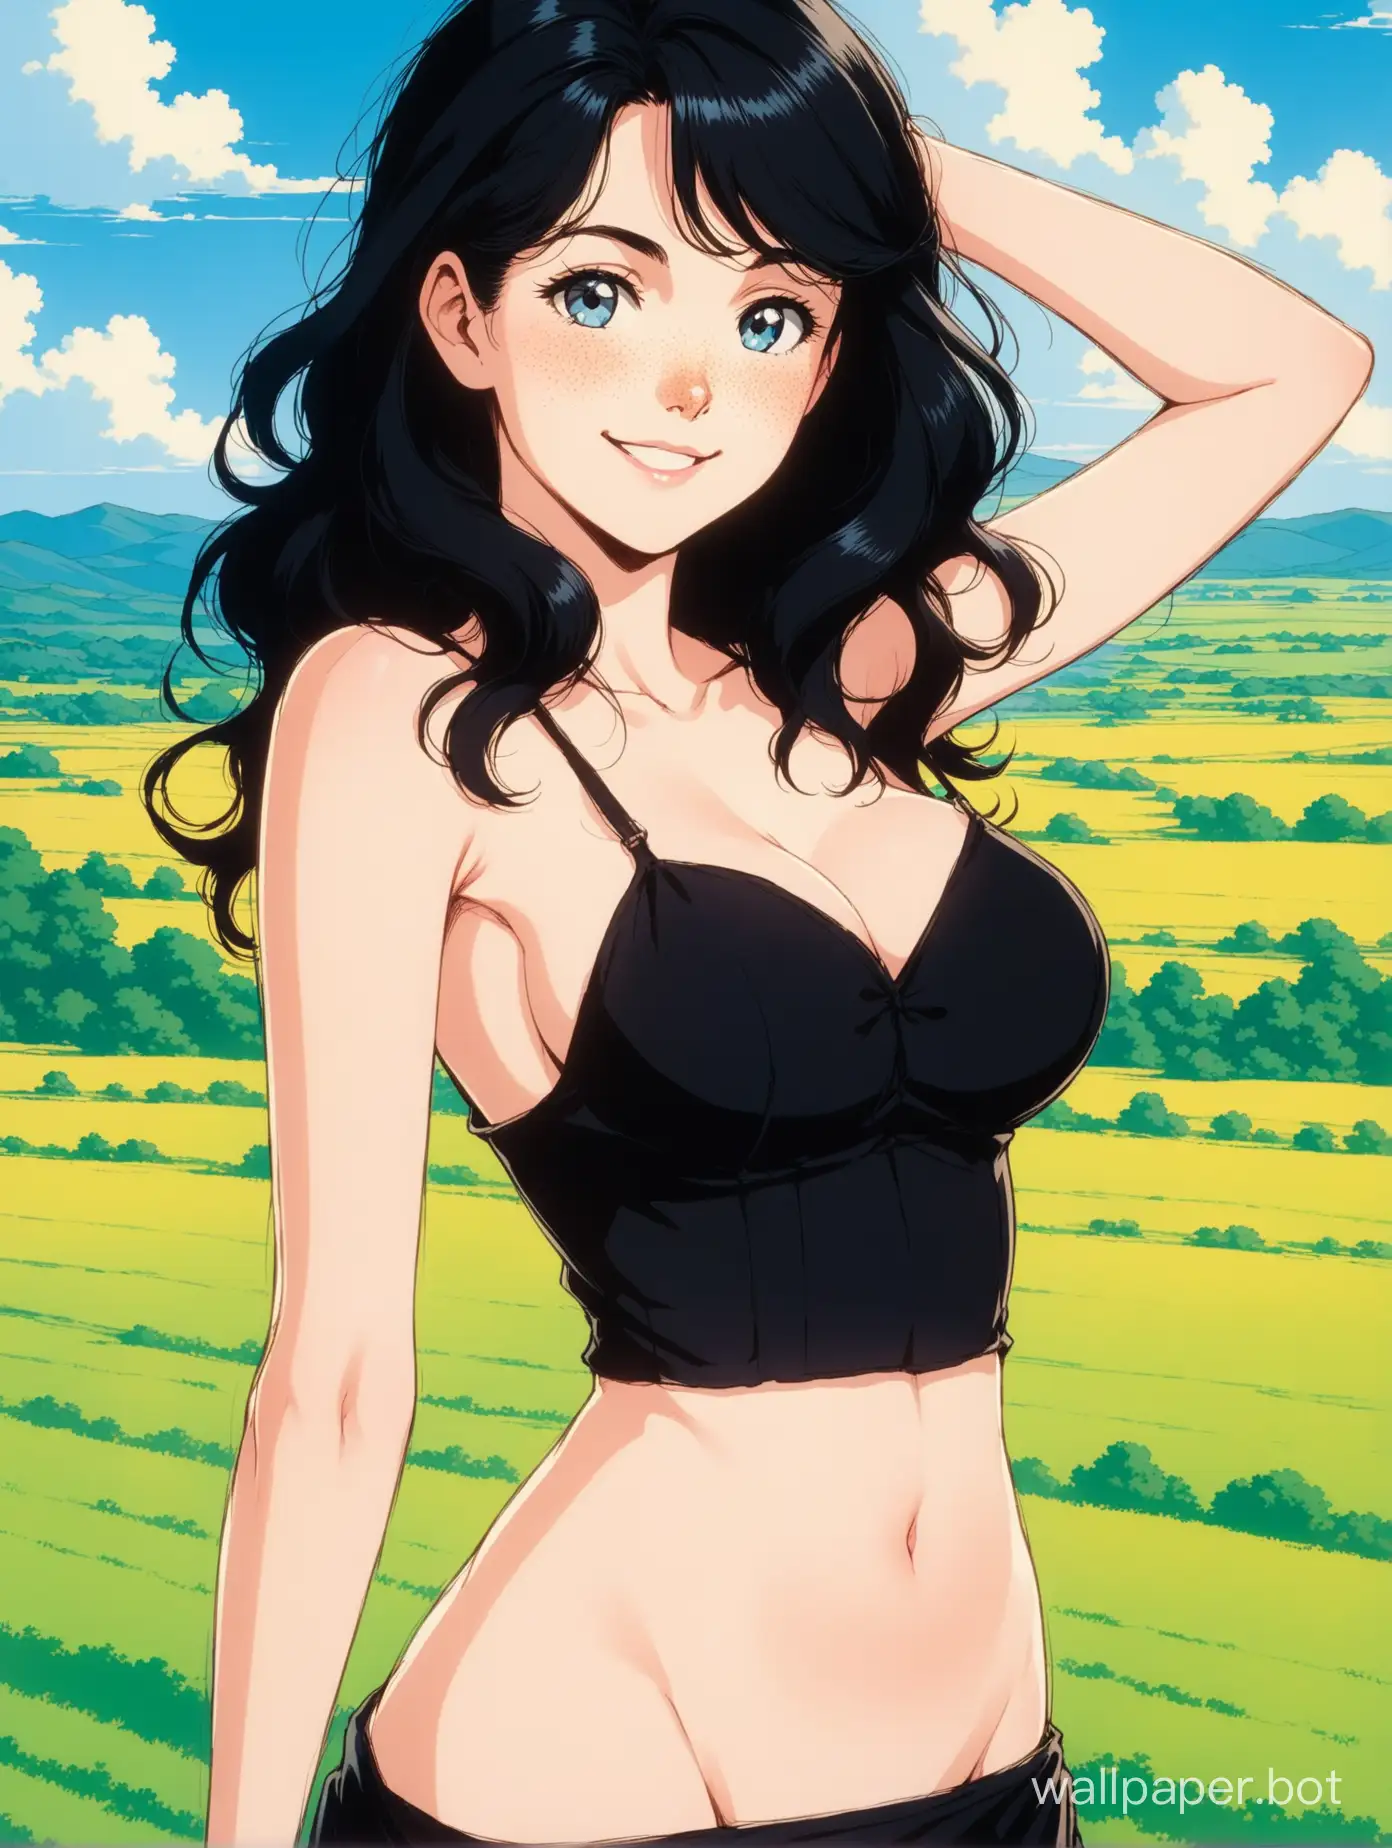 american countryside background, a beautiful 18 year old white woman pulling her top down, revealing her breasts, mature face, goth girl, she is pretty, she has blue eyes, she has pale skin, she has lots of freckles, she has long jet-black hair that is wavy and parted in the middle, black sundress, big pale thighs, skinny,  smiling, beaming, mature face, perfect, sense of wonder, retro 1980s anime